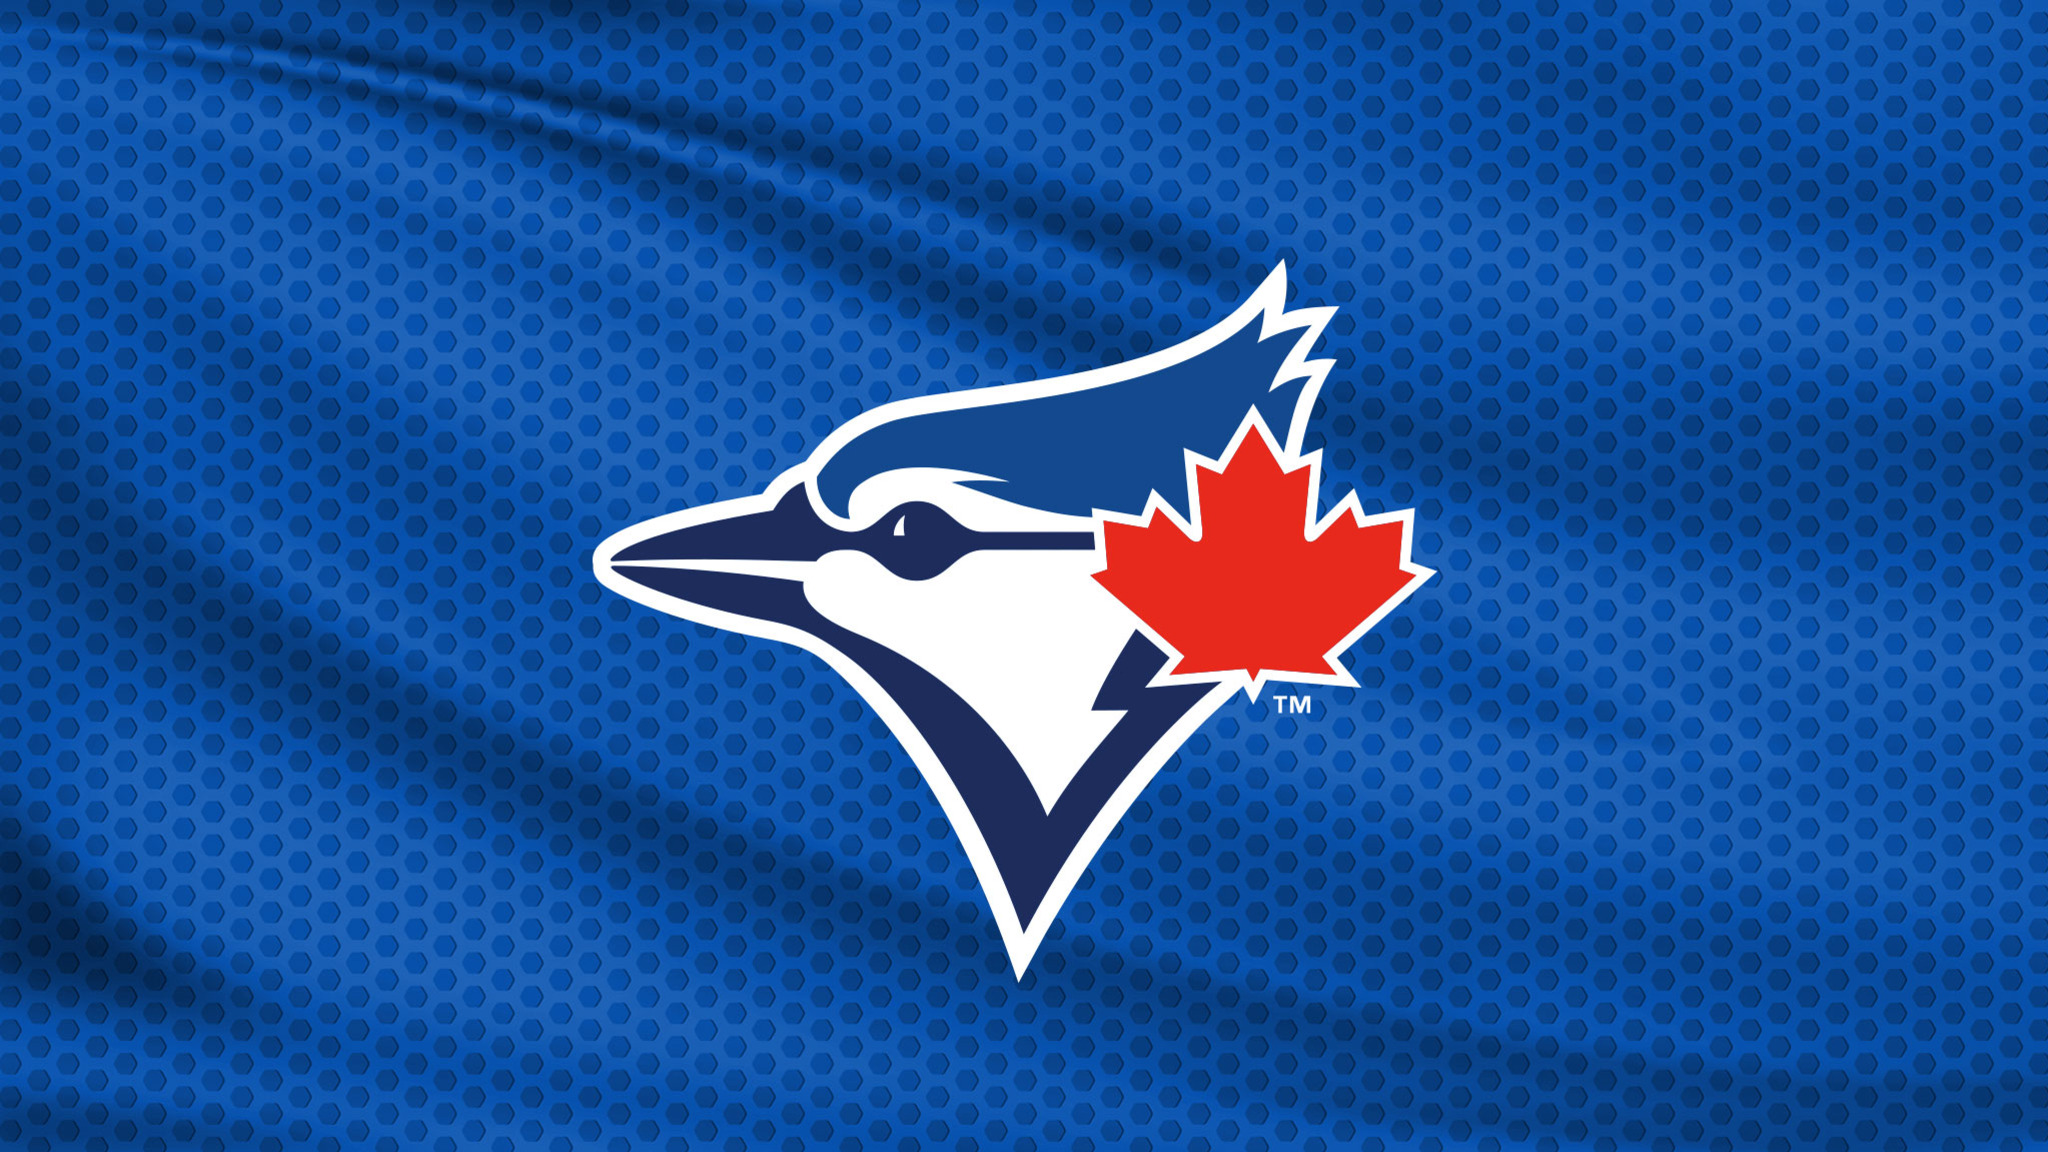 Toronto United Flag Football - This was passed on from the Blue Jays,  special reduced pricing for the Blue Jays Pride Game first 20,000 get the  free bluejays pride hat. I'll be